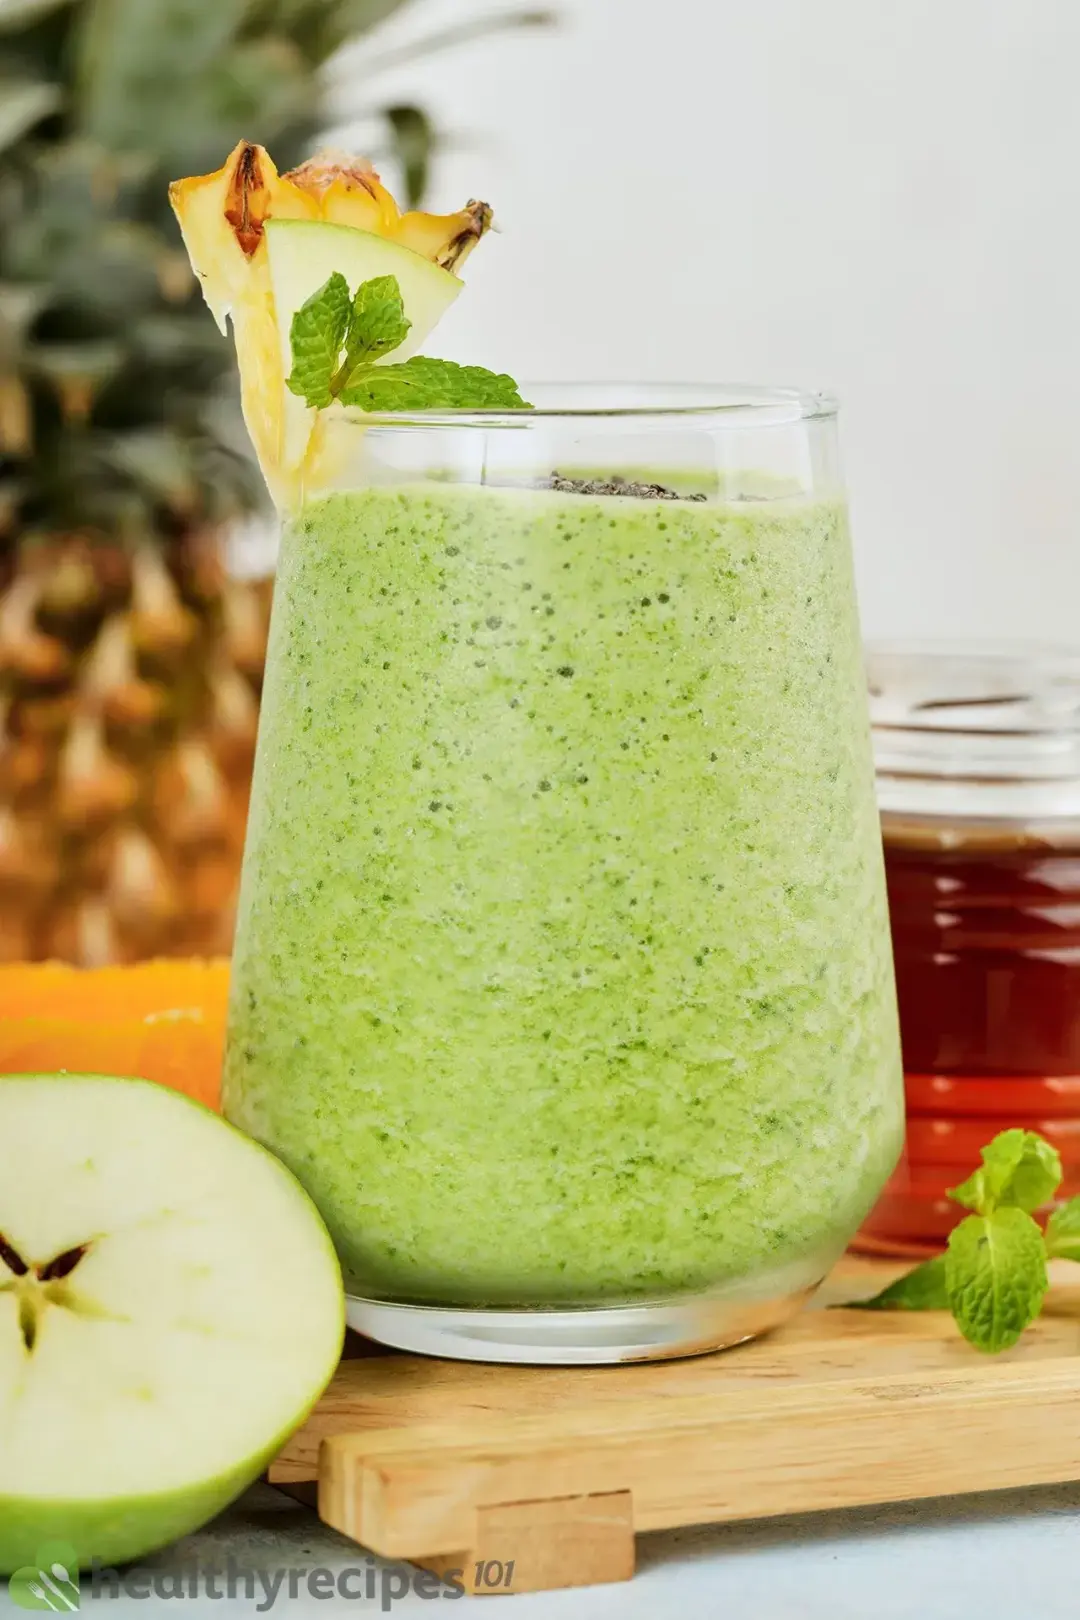 Benefits of Green Apple Smoothie